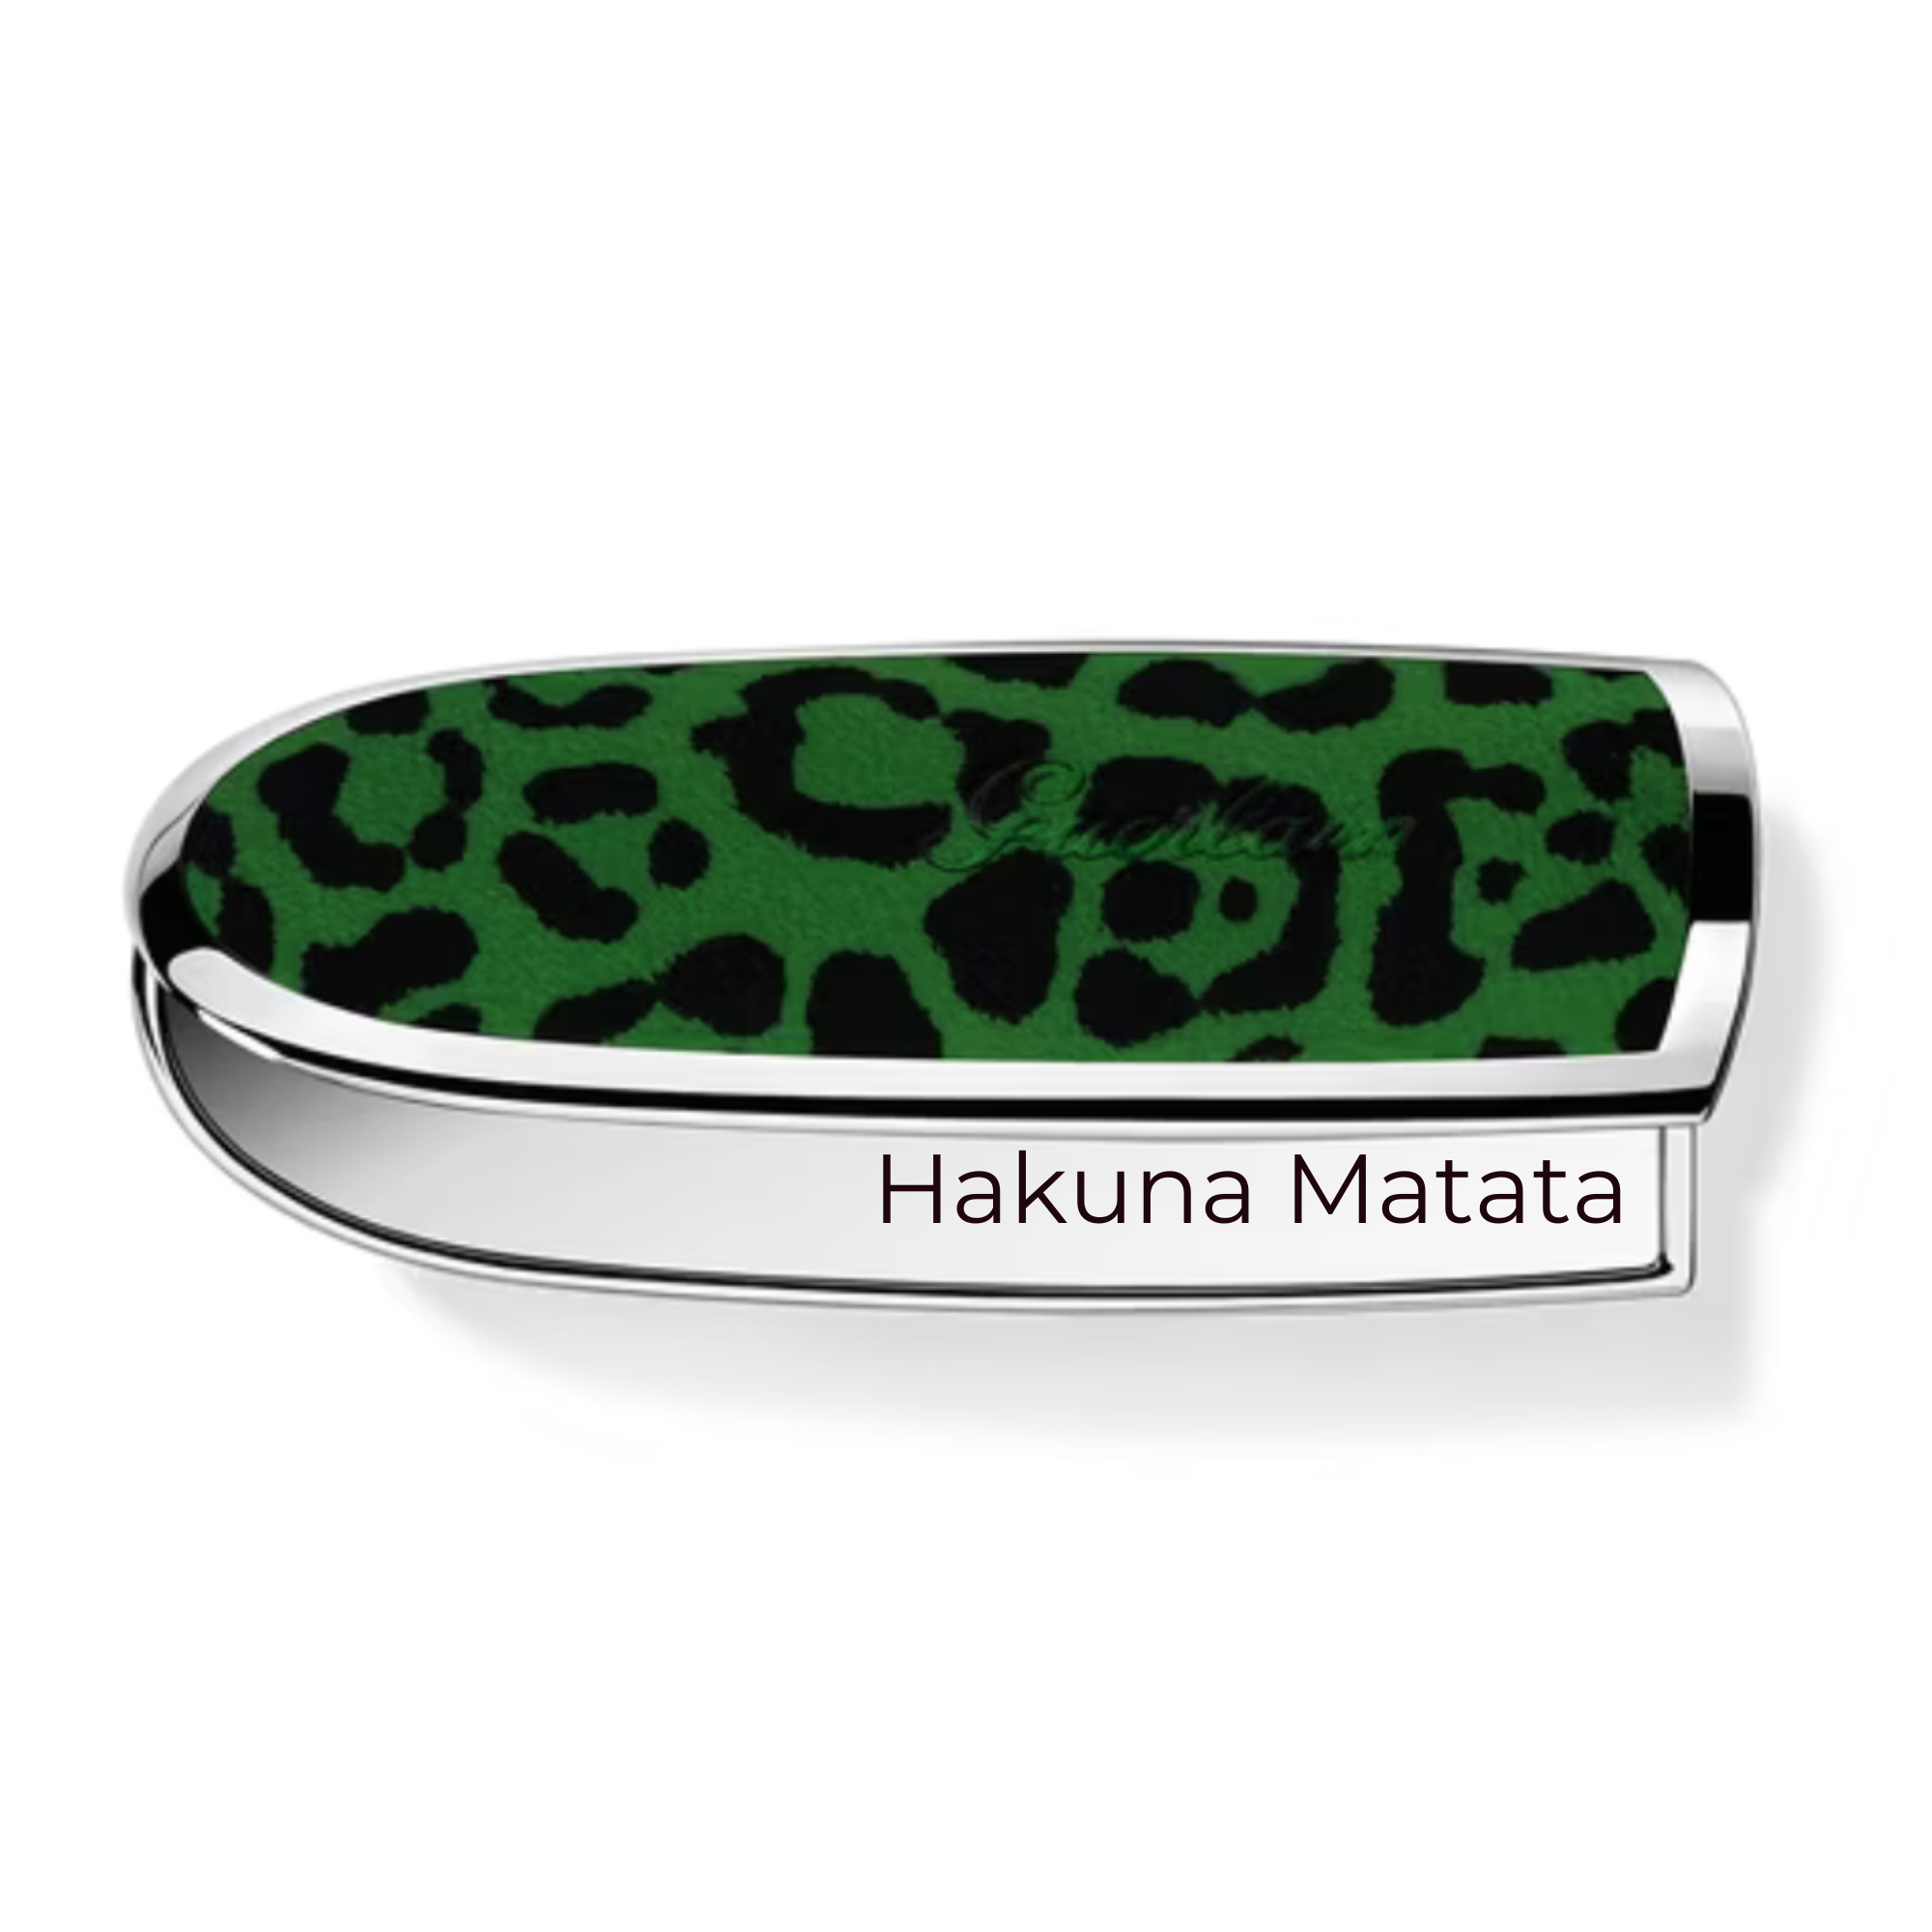 Refillable Animal Fantasy Lipstick Cases  "Engraved" Be in the Pink Mantras (LE)